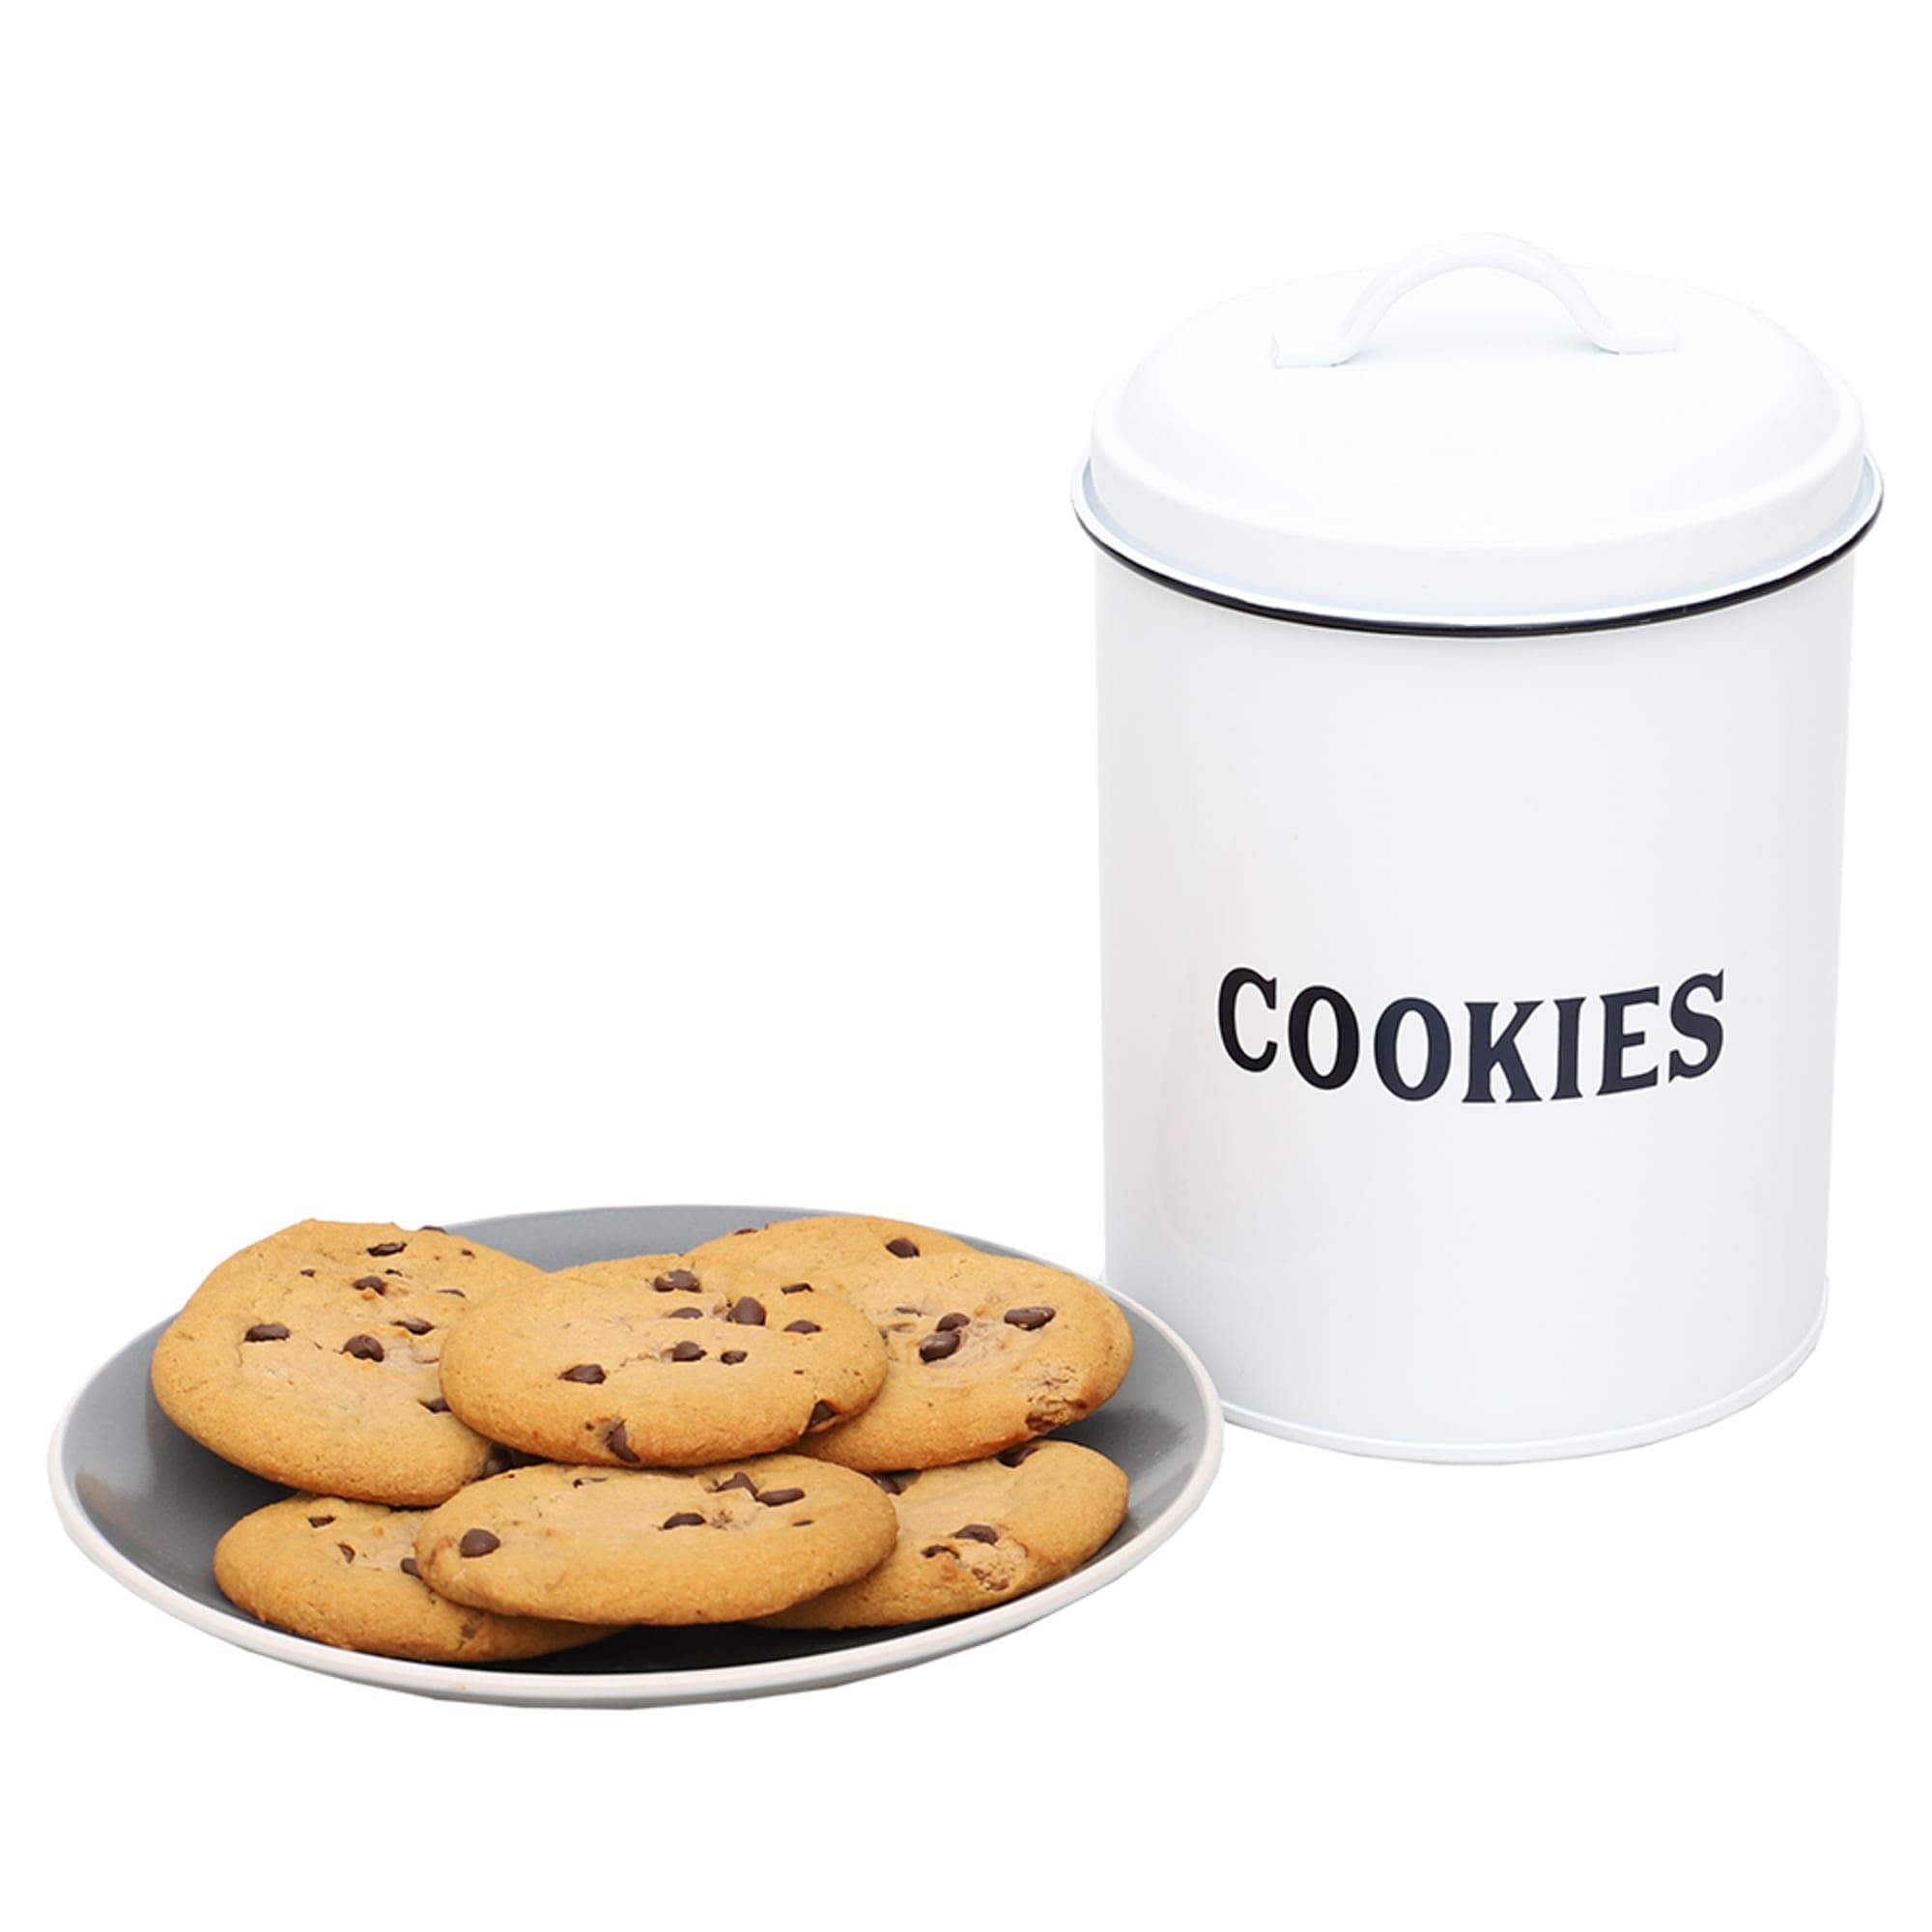 Home Basics Countryside Cookies Tin Canister, White $10.00 EACH, CASE PACK OF 12